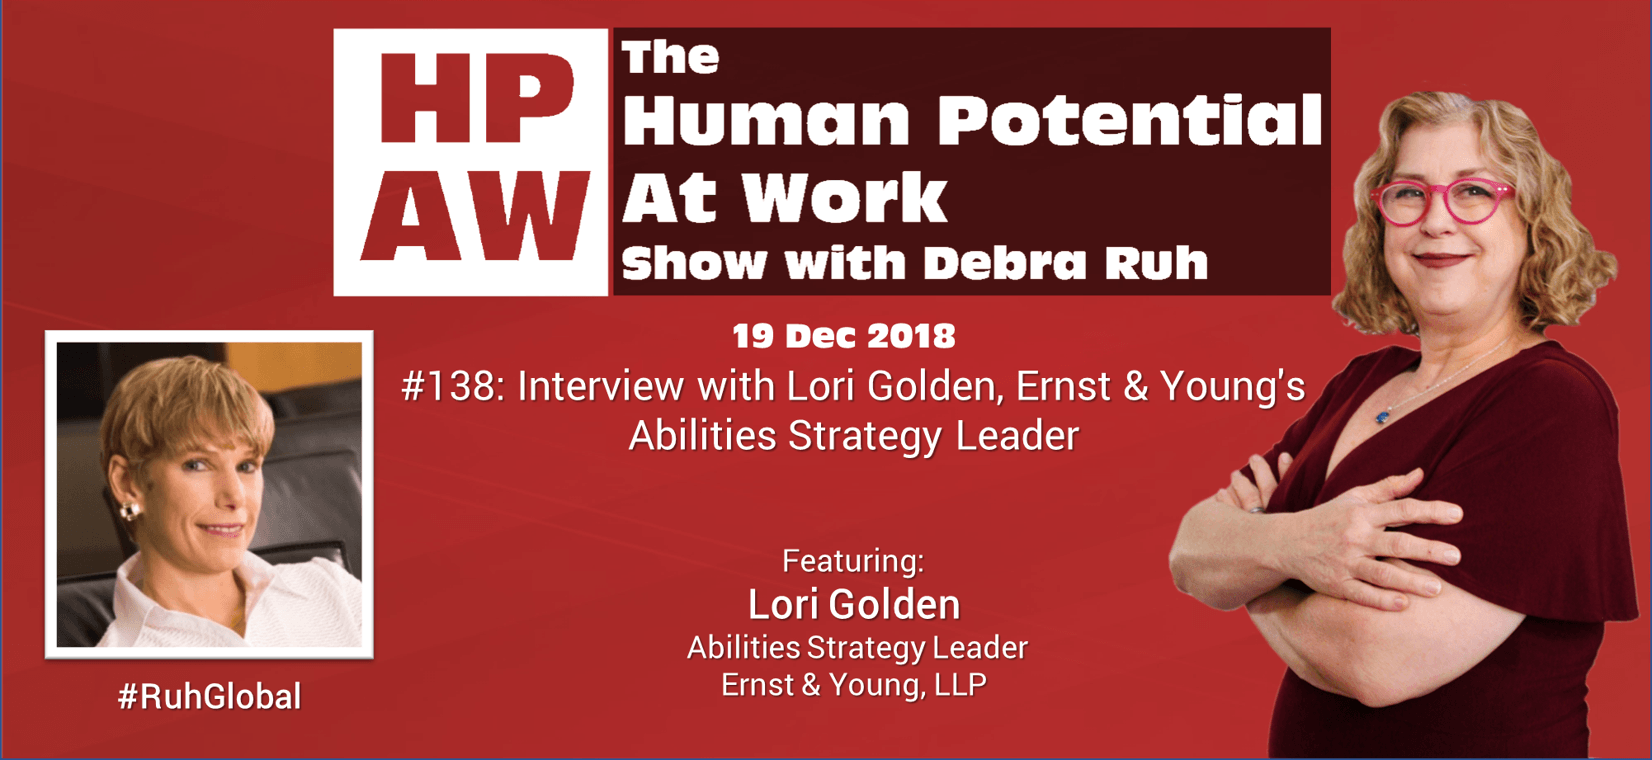 Episode Flyer for #138 Interview with Lori Golden, Ernst & Young's Abilities Strategy Leader